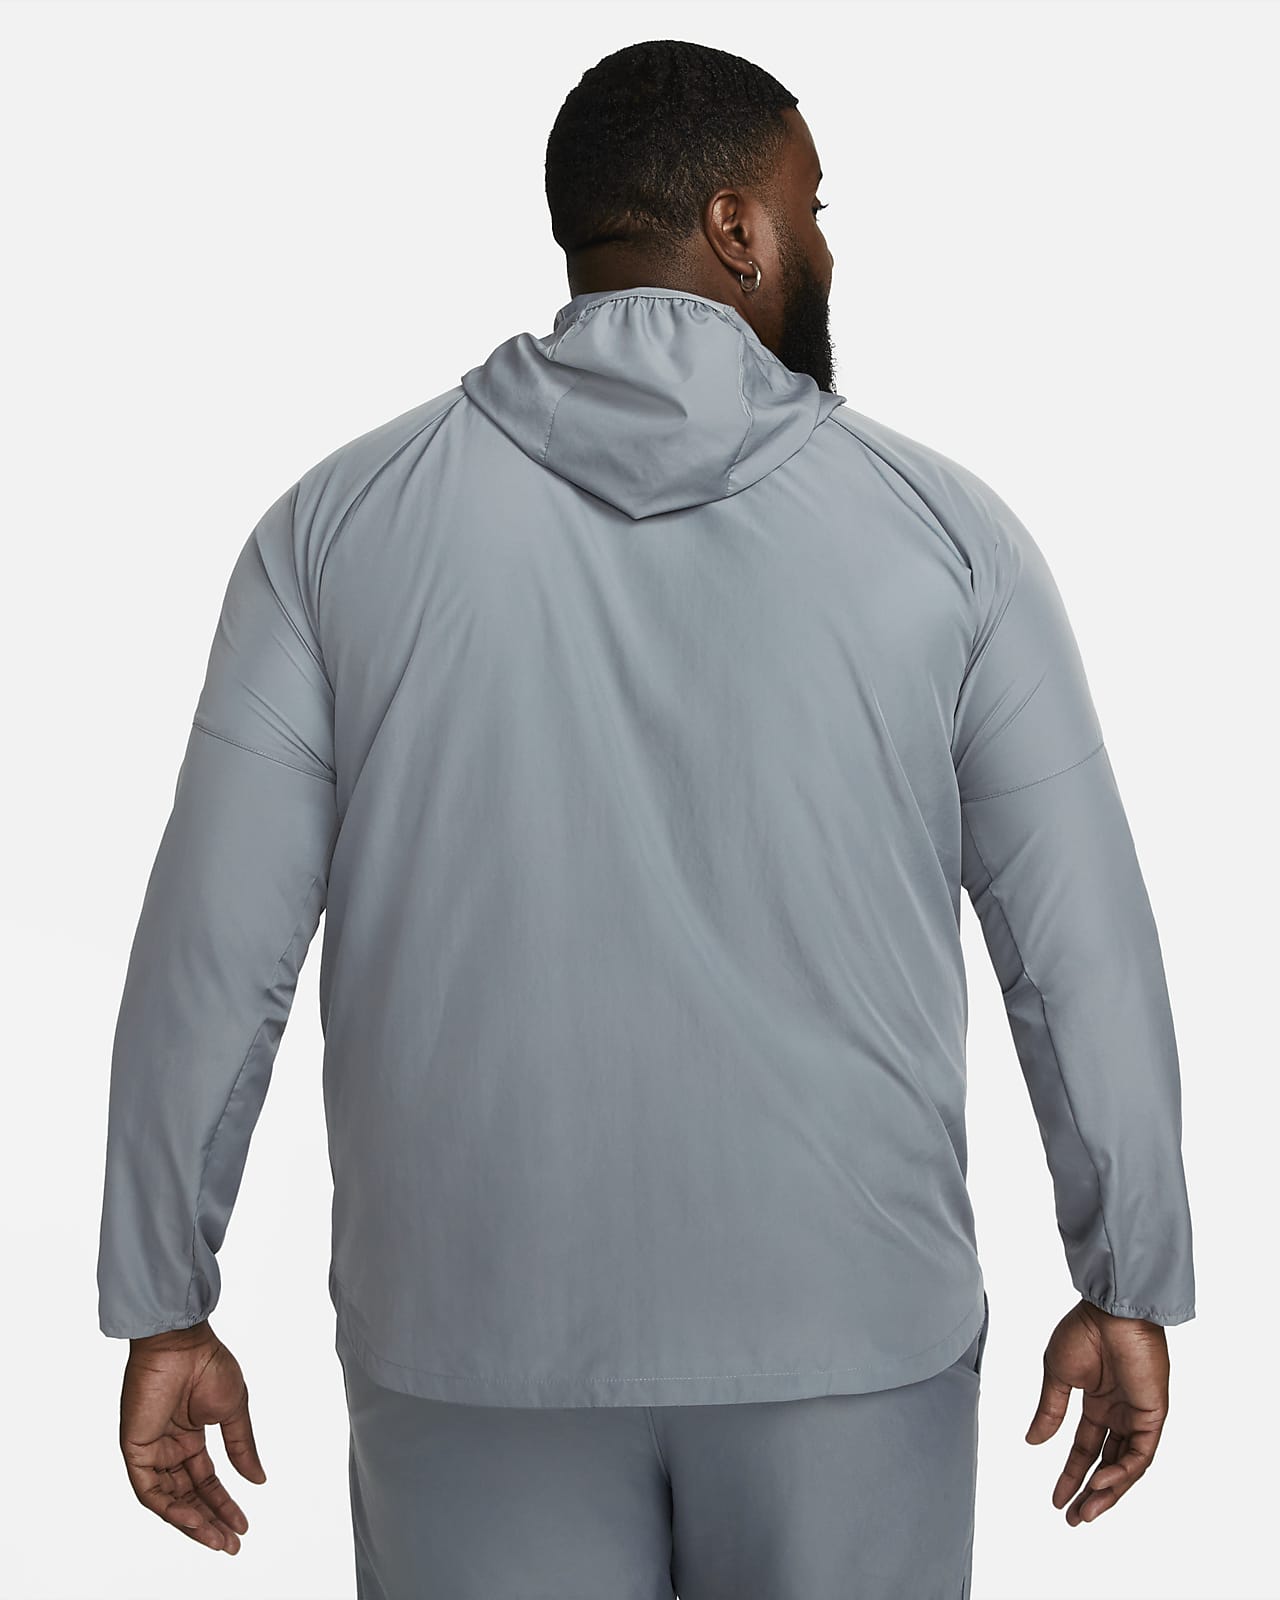 Nike Therma-Fit Repel Jacket – DTLR